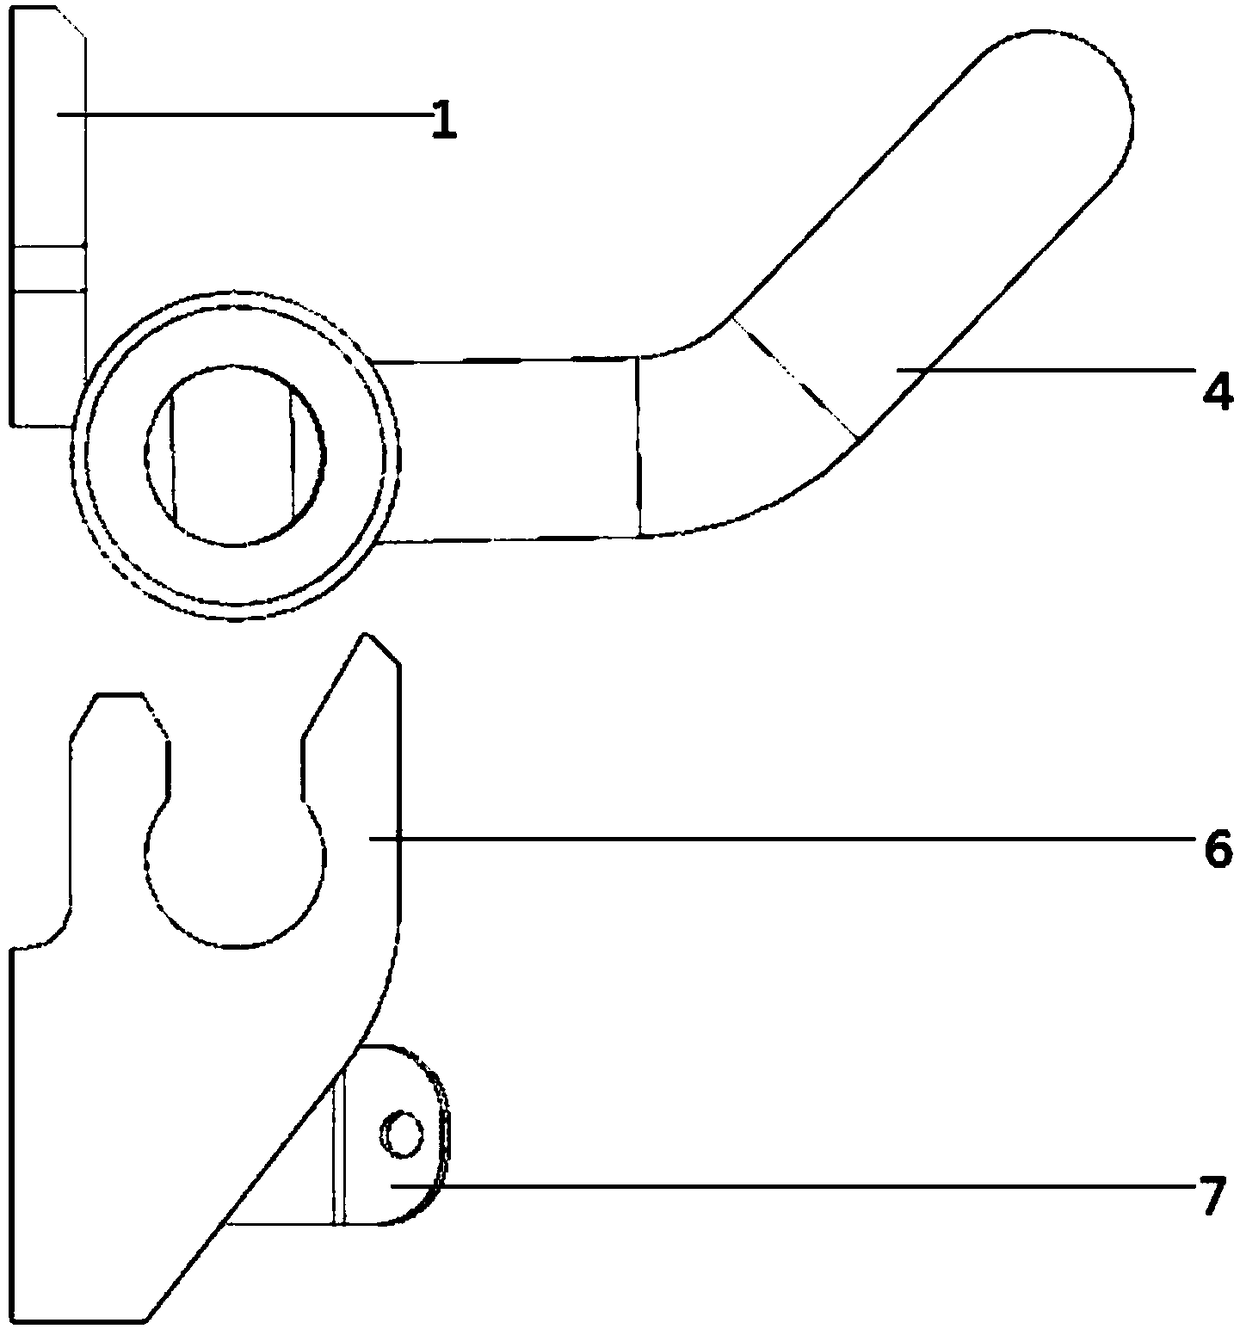 A lock structure applied in shock and vibration scene